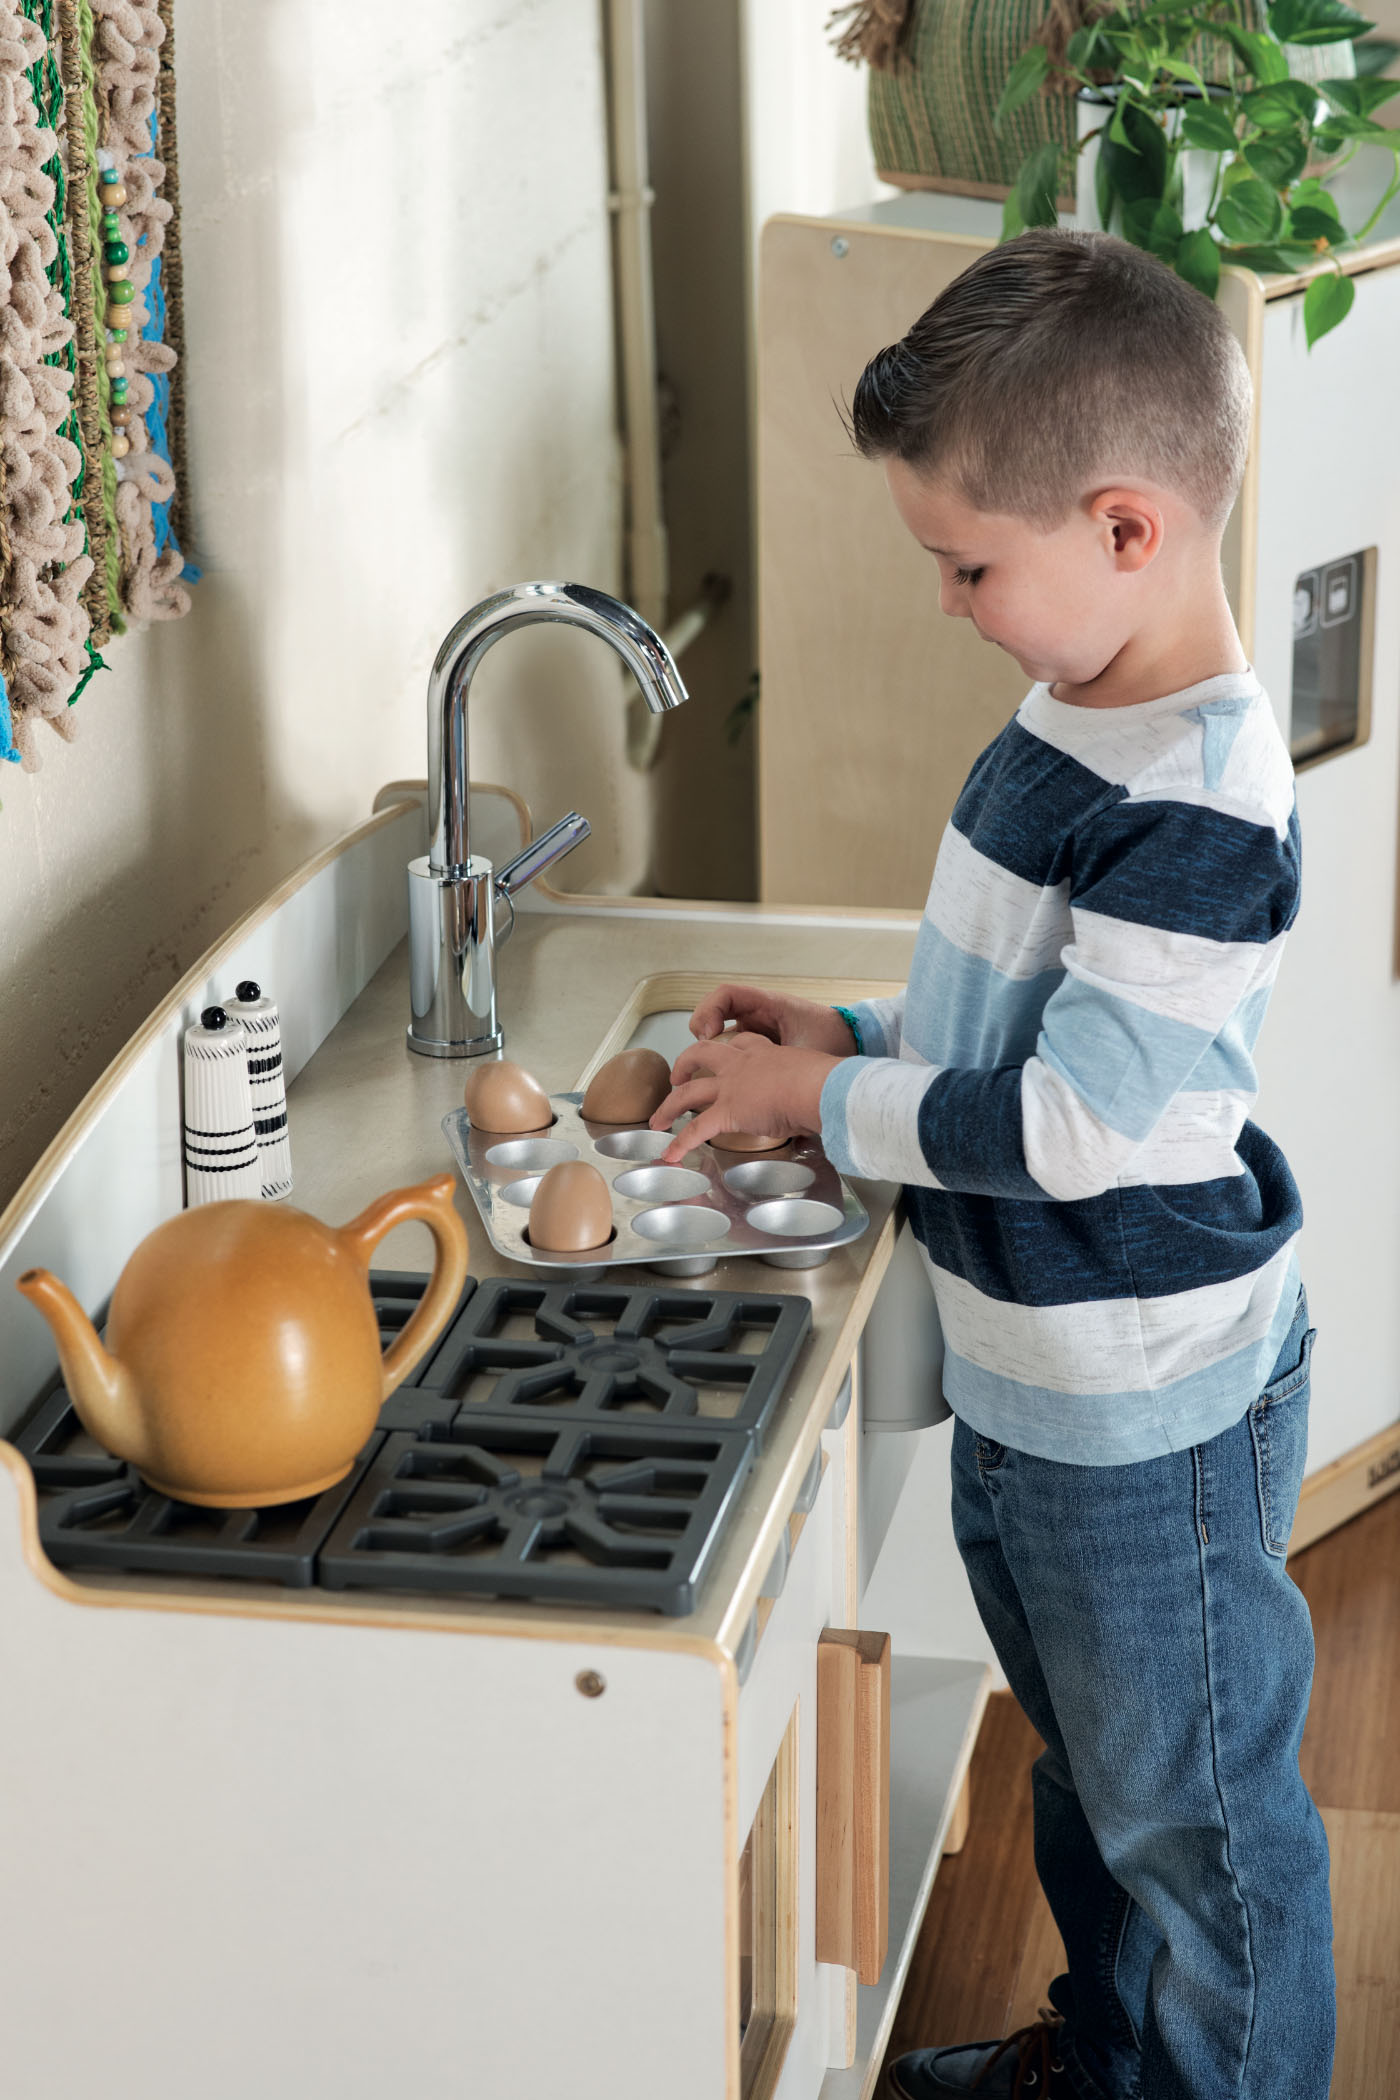 Child playing with kitchen